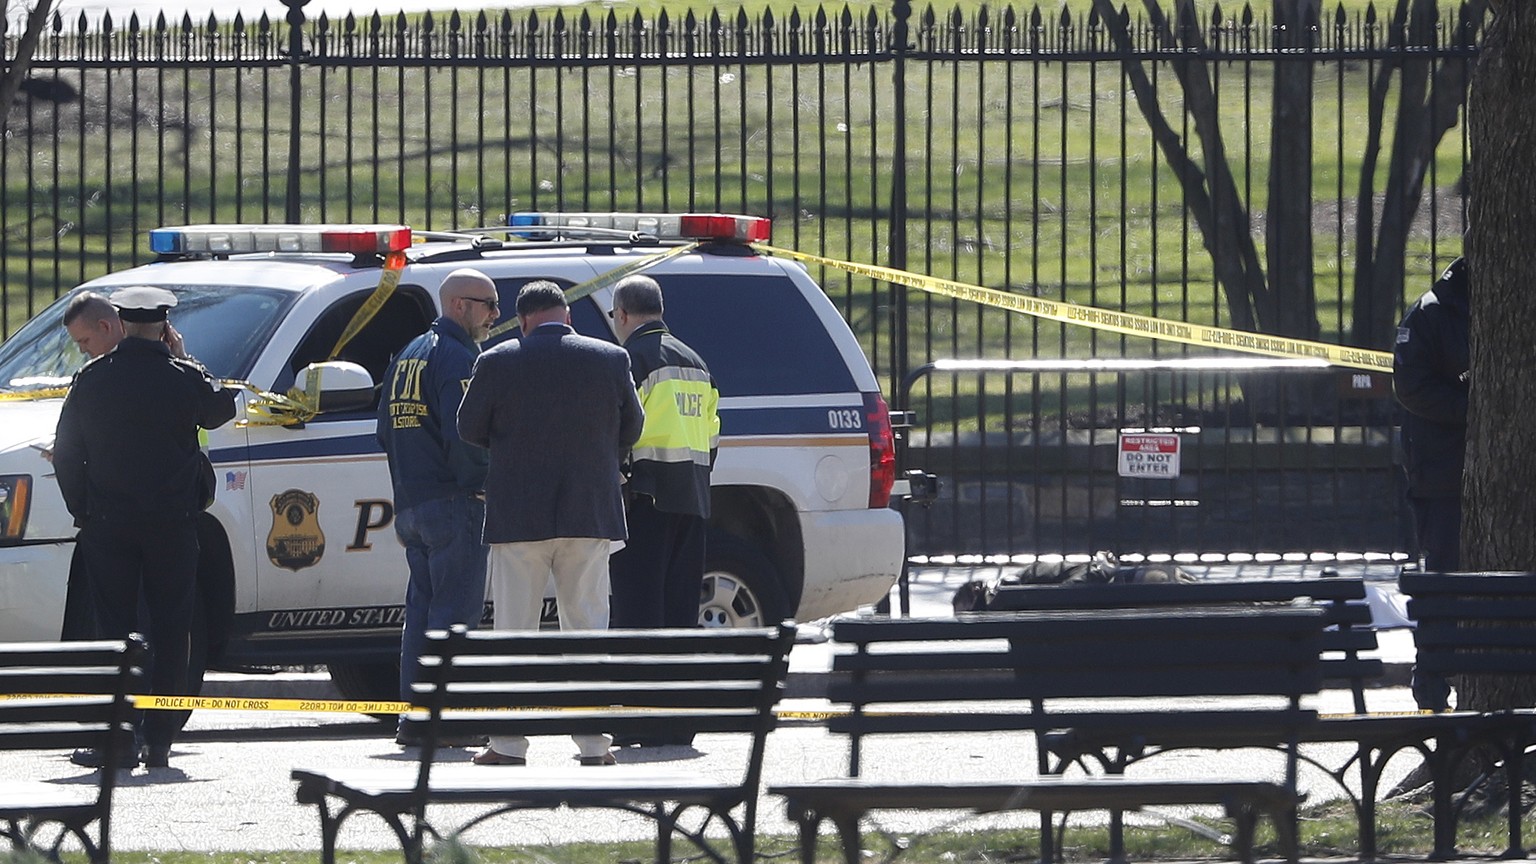 Law enforcement officers gather in front of the White House in Washington, after the area was closed to pedestrian traffic, Saturday, March 3, 2018. Authorities said a man shot himself to death outsid ...